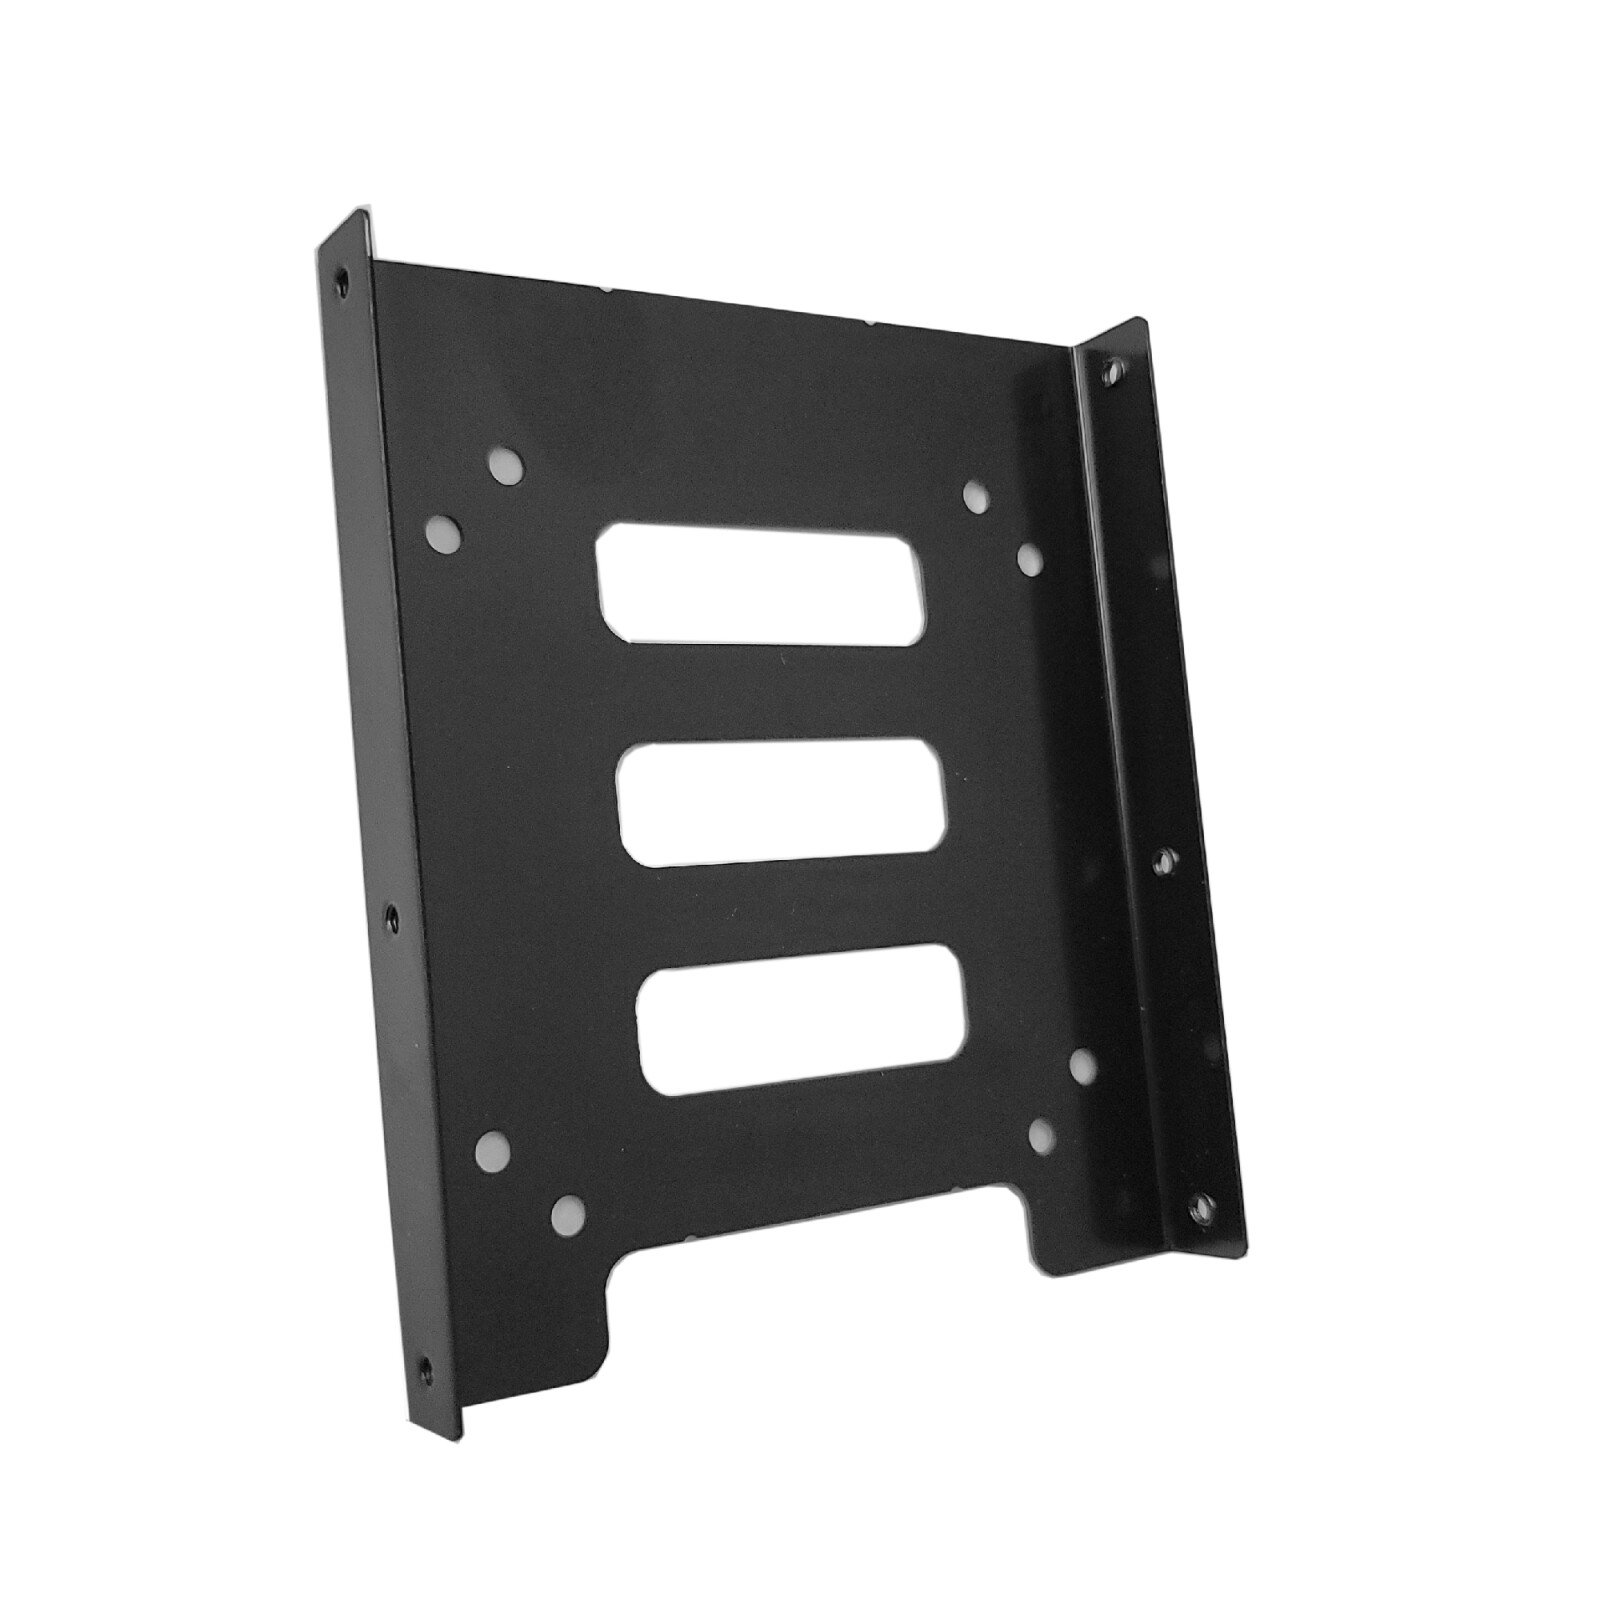 ADAPTOR SPACER fixare HDD/ SSD 2.5" in bay de 3.5", 1 x 2.5", "SPR-25352" thumb